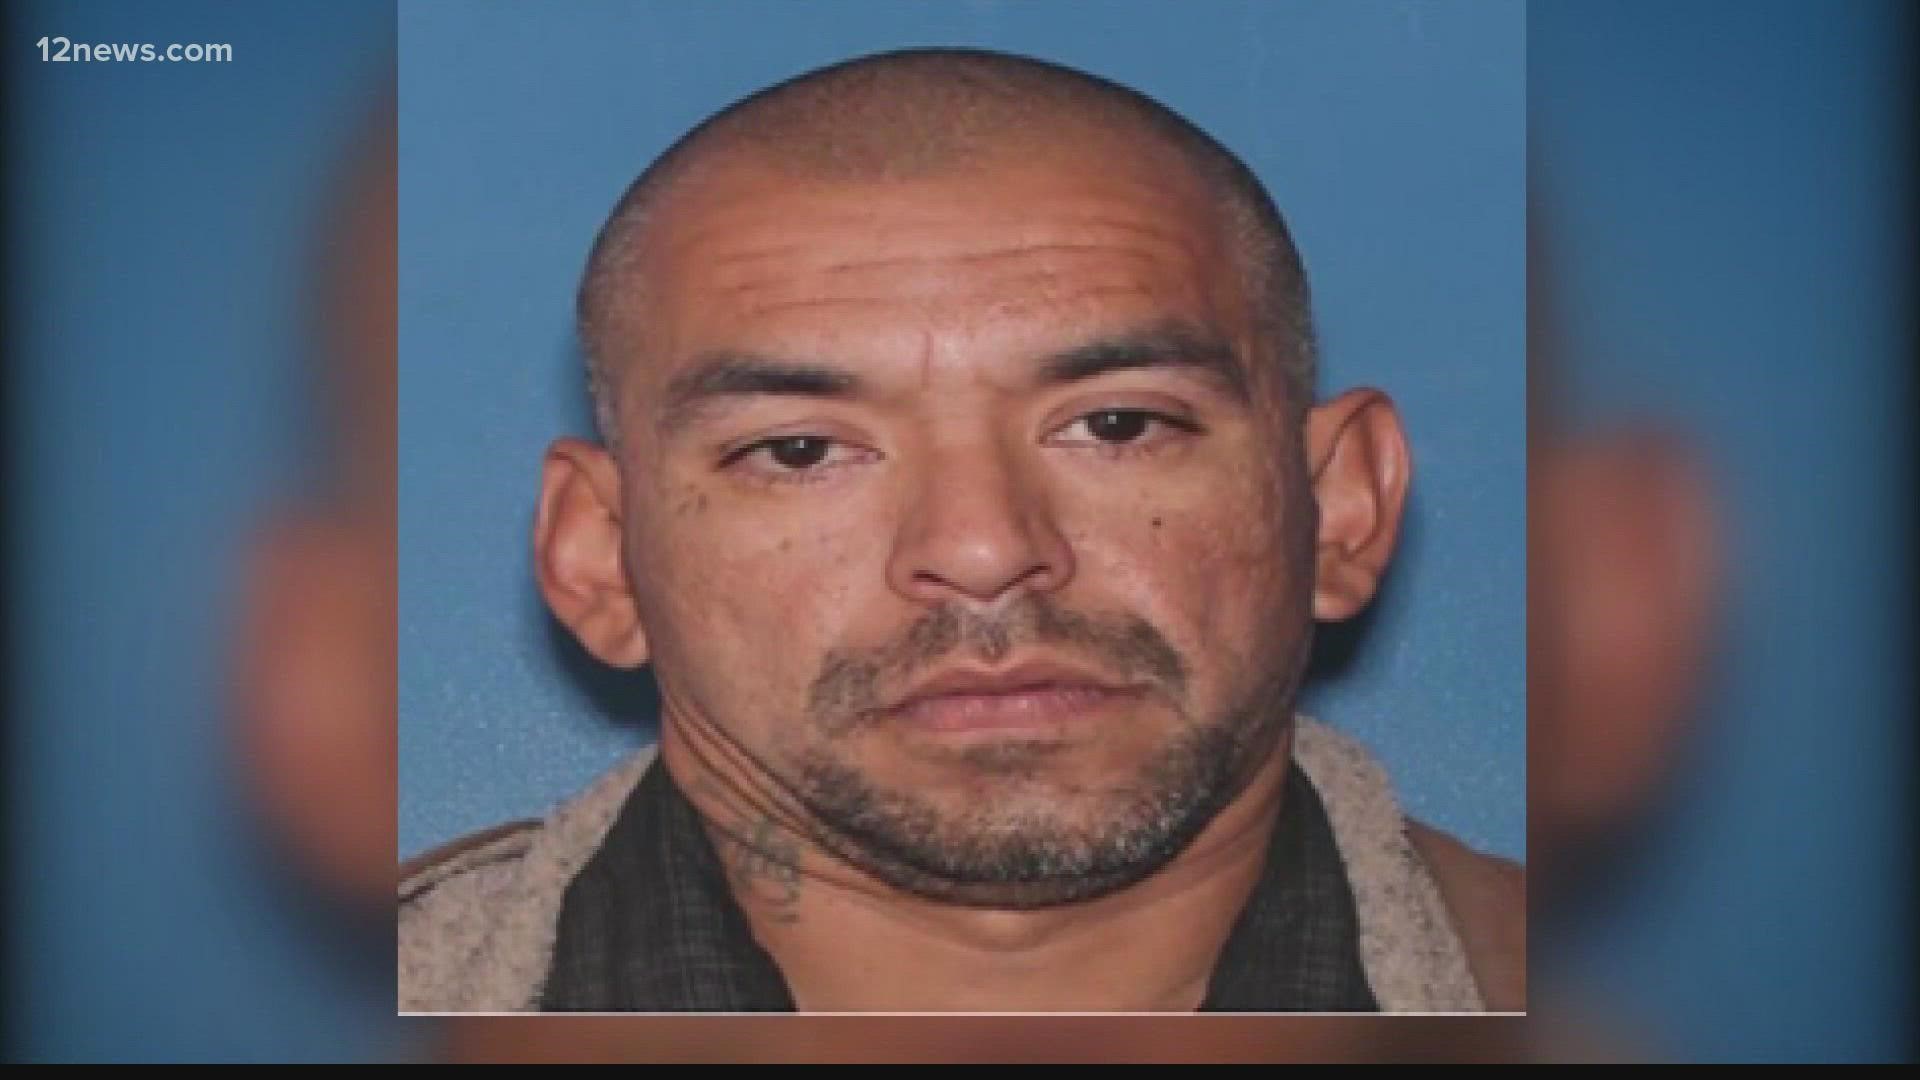 According to officials from the Yavapai-Apache Nation, Officer Preston Brogdon is in critical, but stable condition. The suspect is still on the loose.